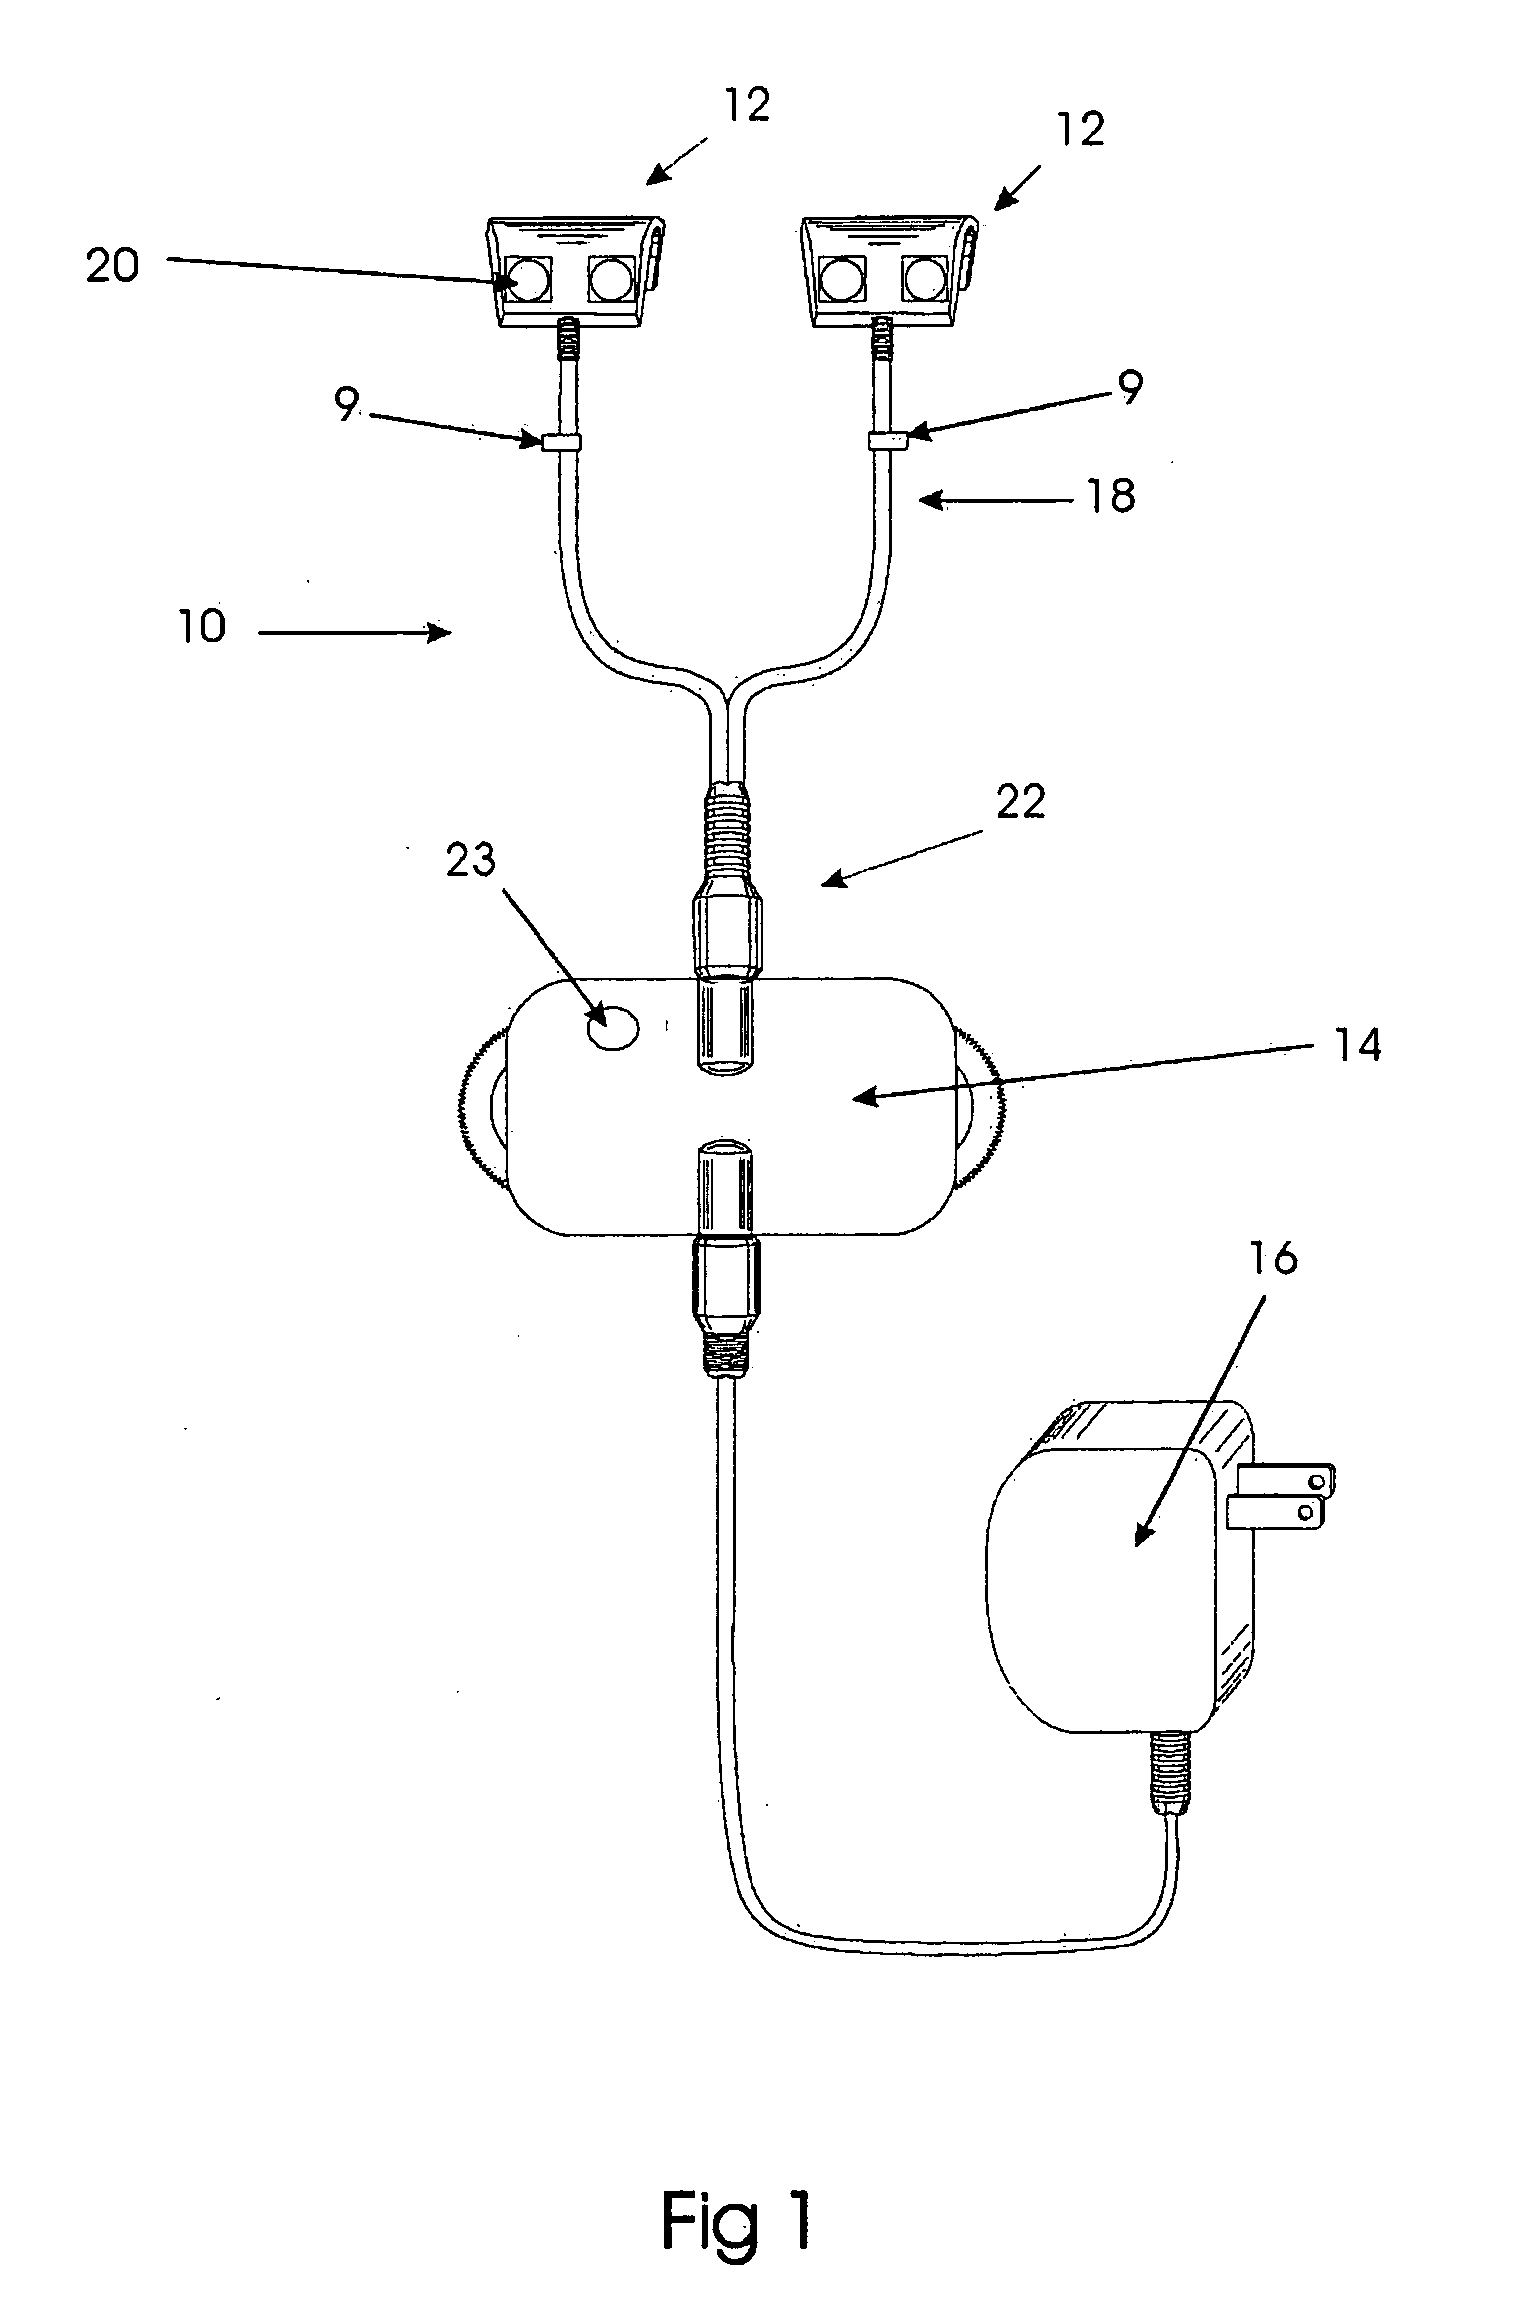 Device for unilateral or bilateral illumination of oral cavity